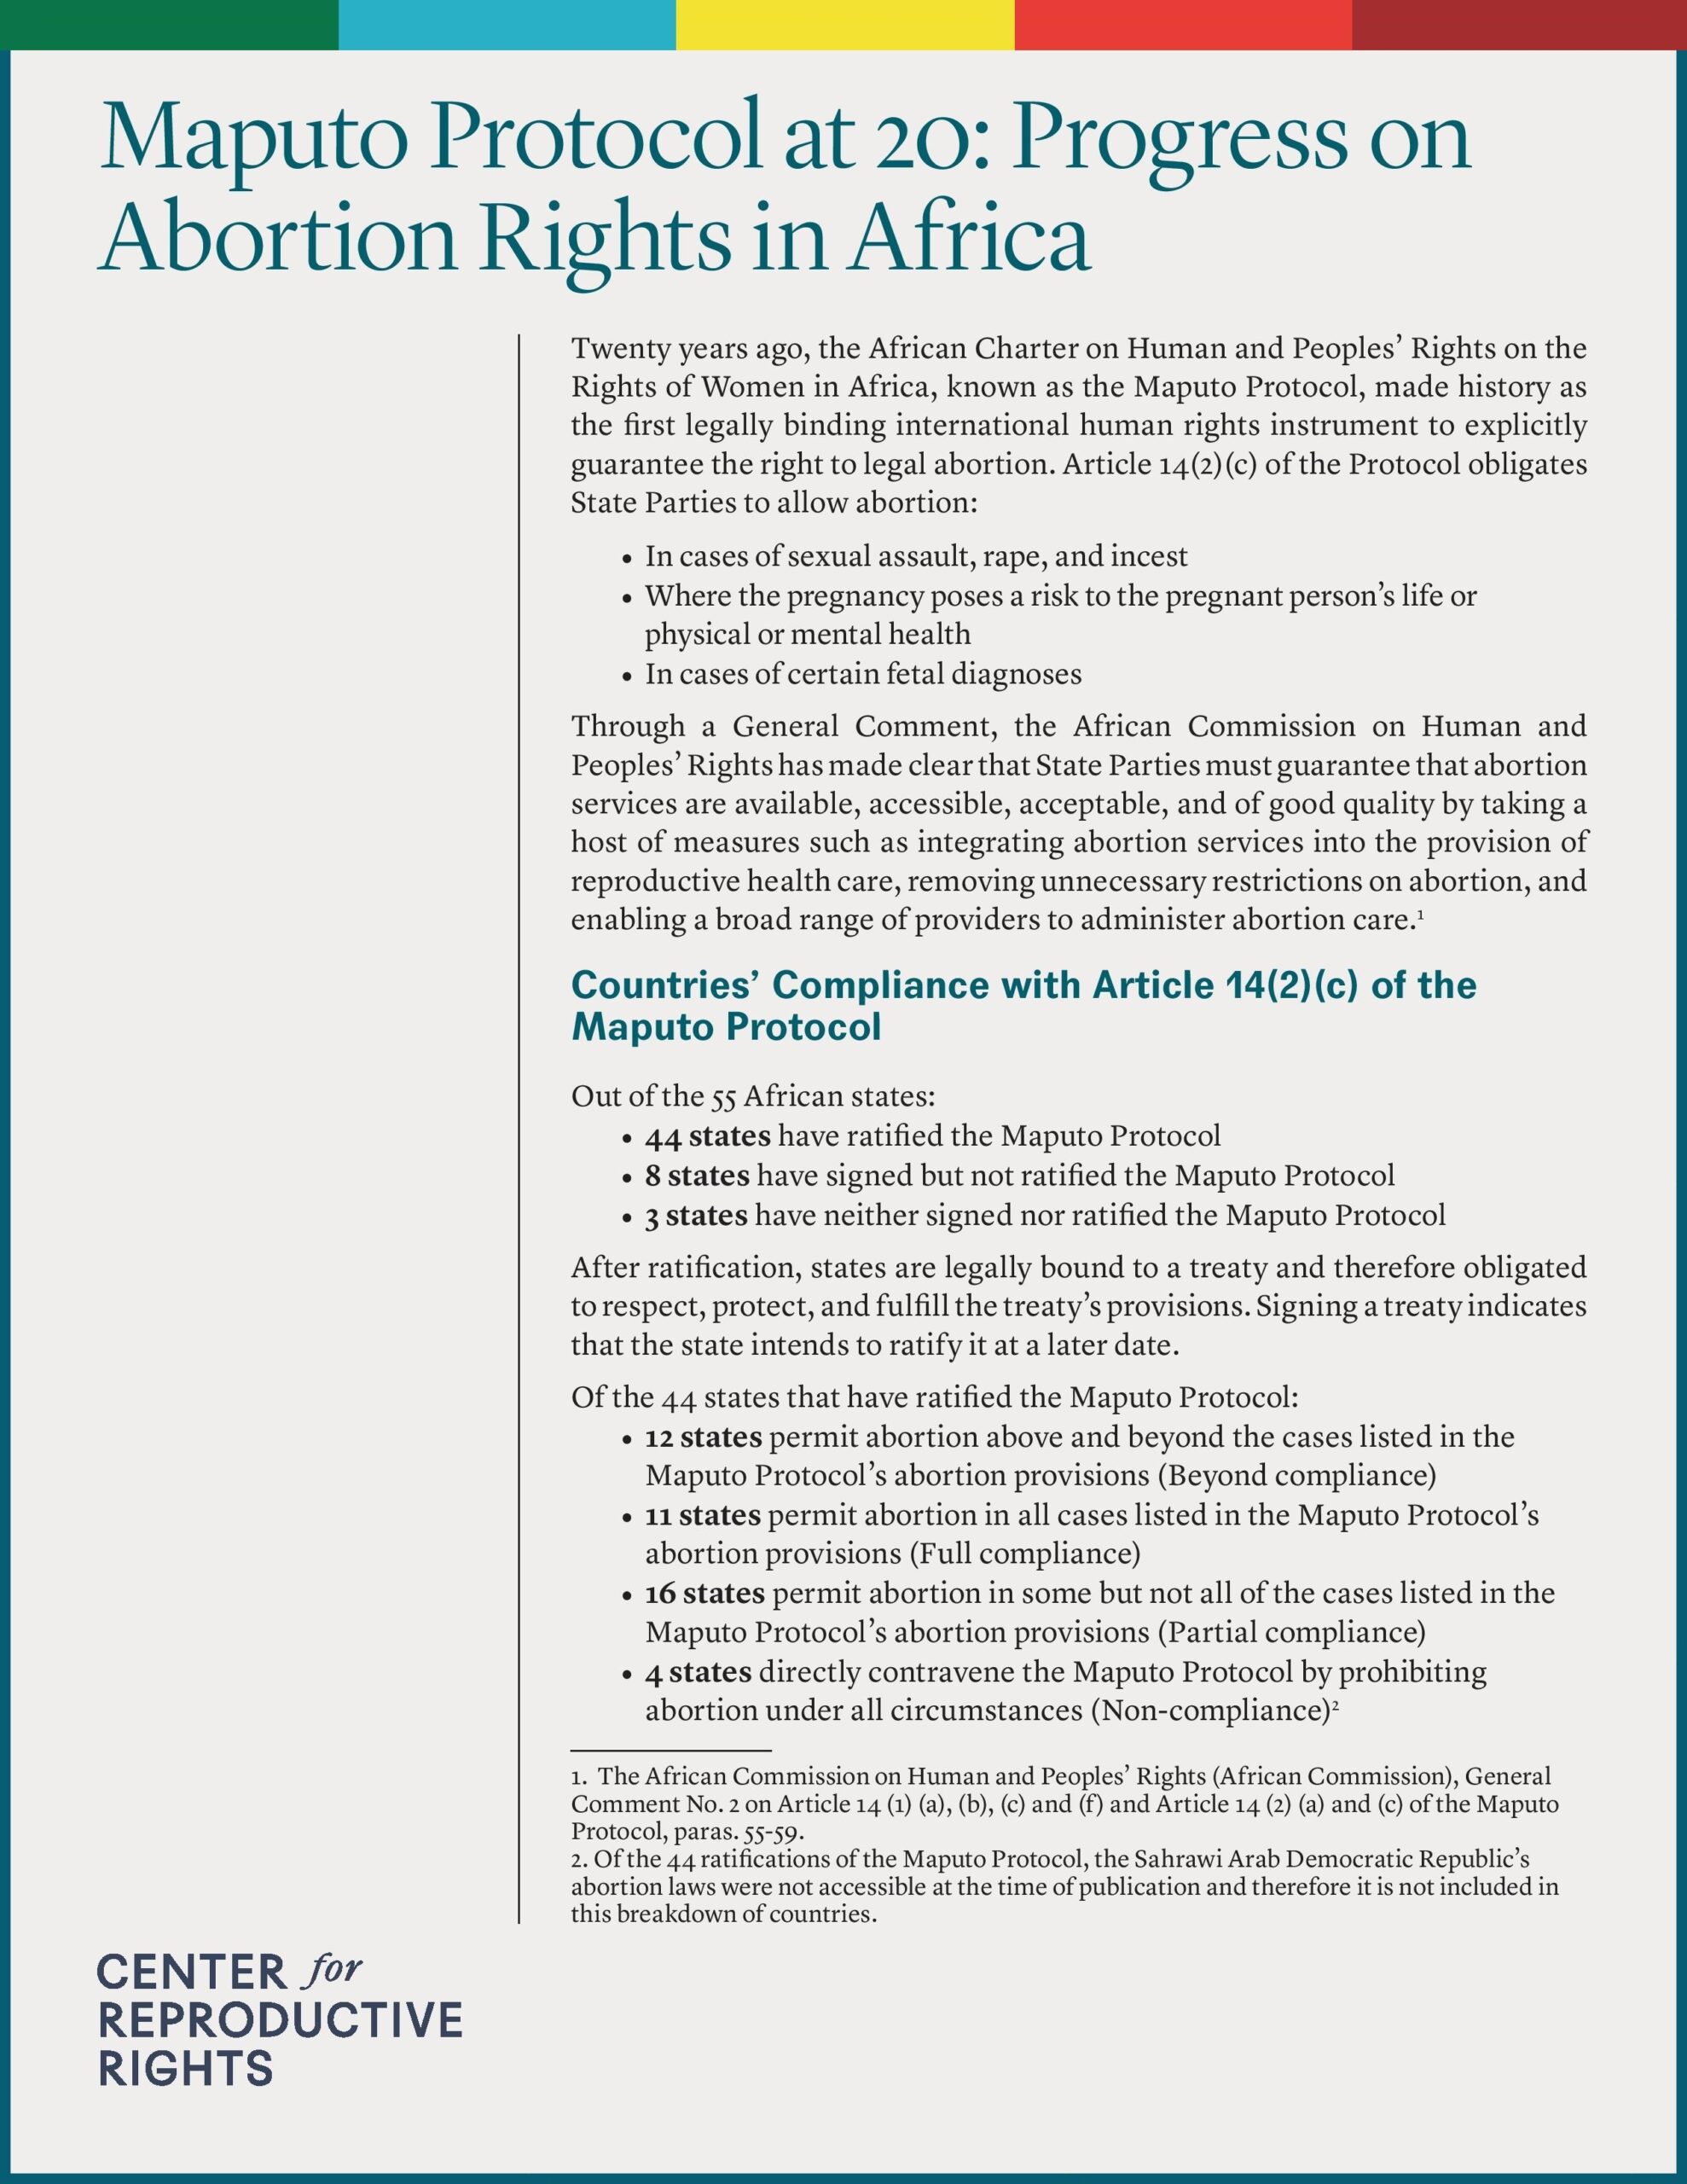 Cover of Center report, "Maputo Protocol at 20: Progress on Abortion Rights in Africa"